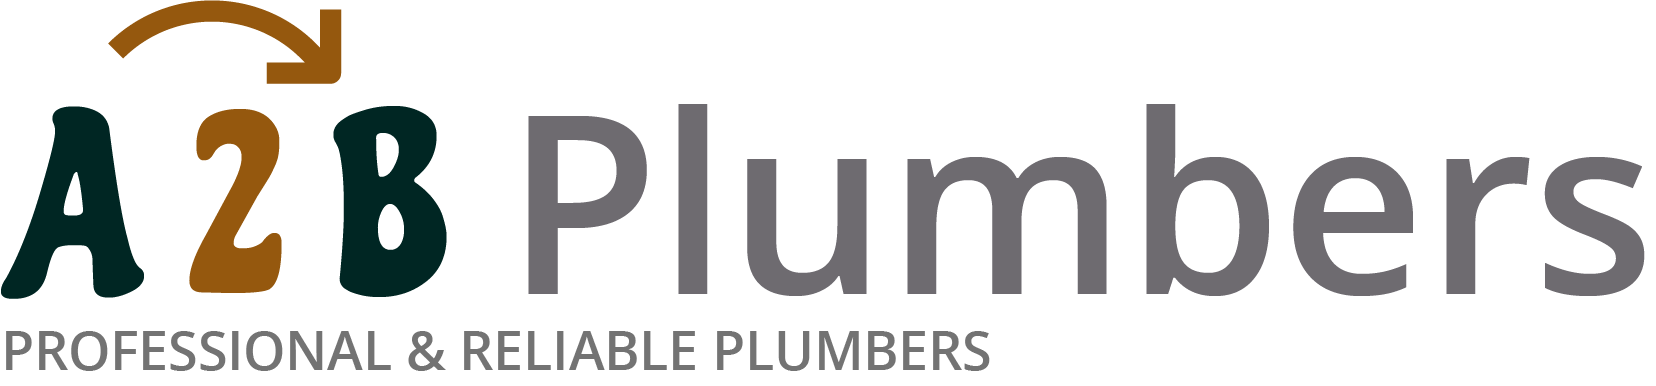 If you need a boiler installed, a radiator repaired or a leaking tap fixed, call us now - we provide services for properties in Crompton and the local area.